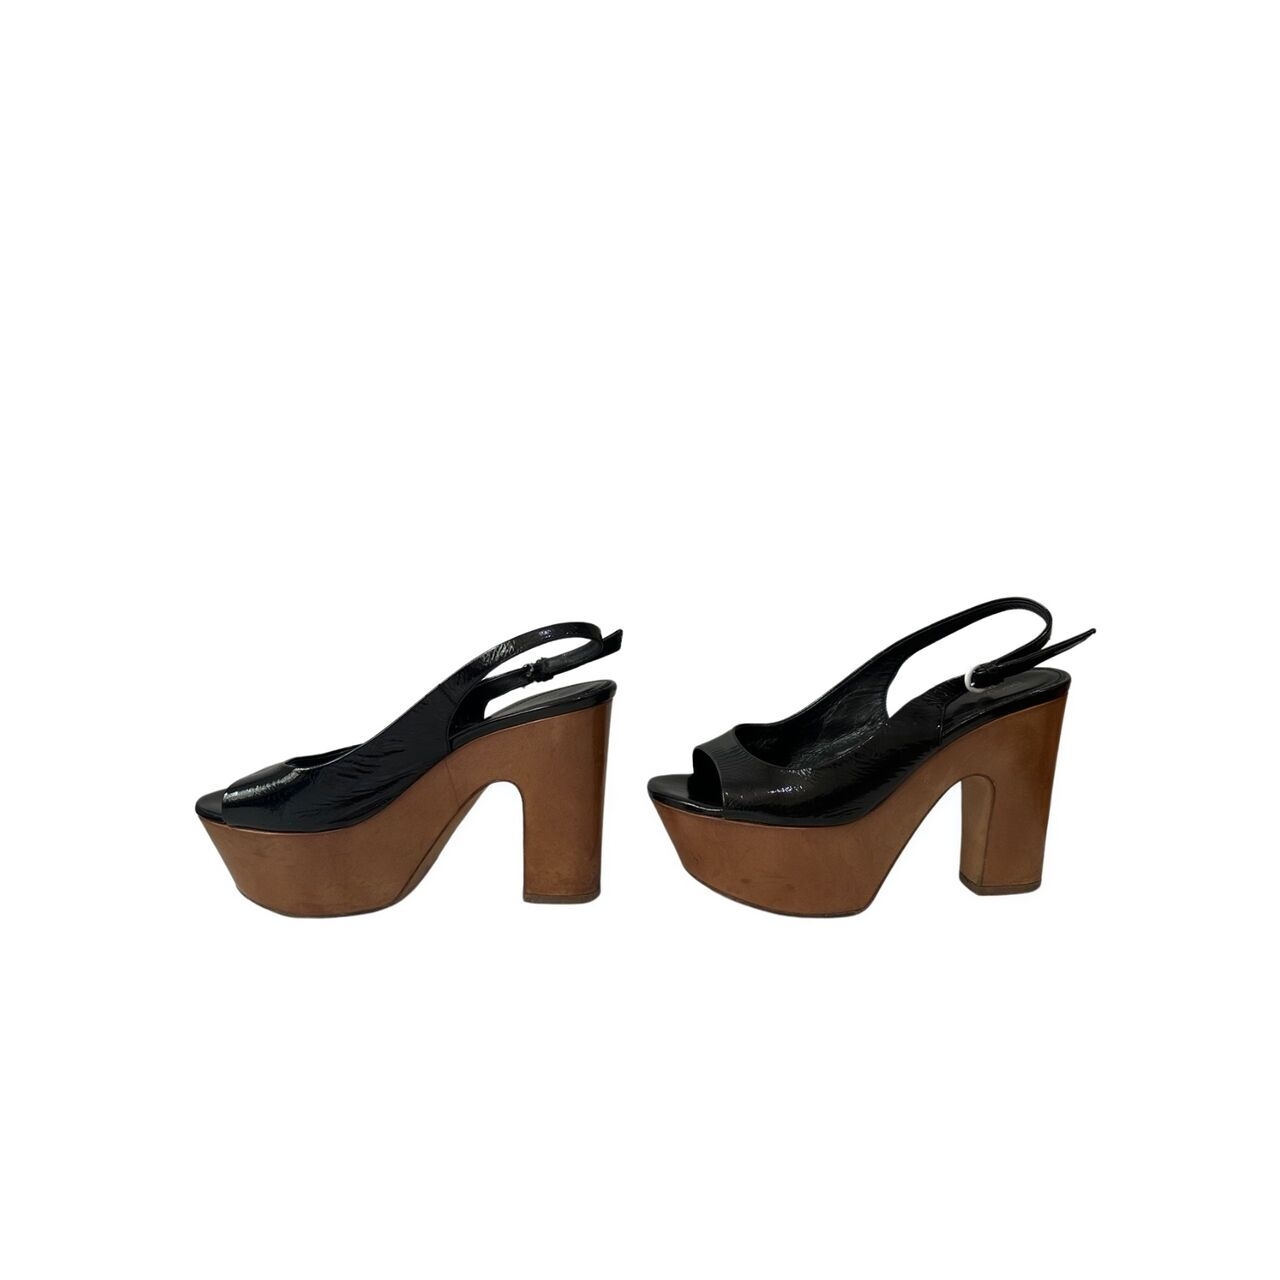 Sergio Rossi Black Wooden Clogs Slingback Sandals Wedges